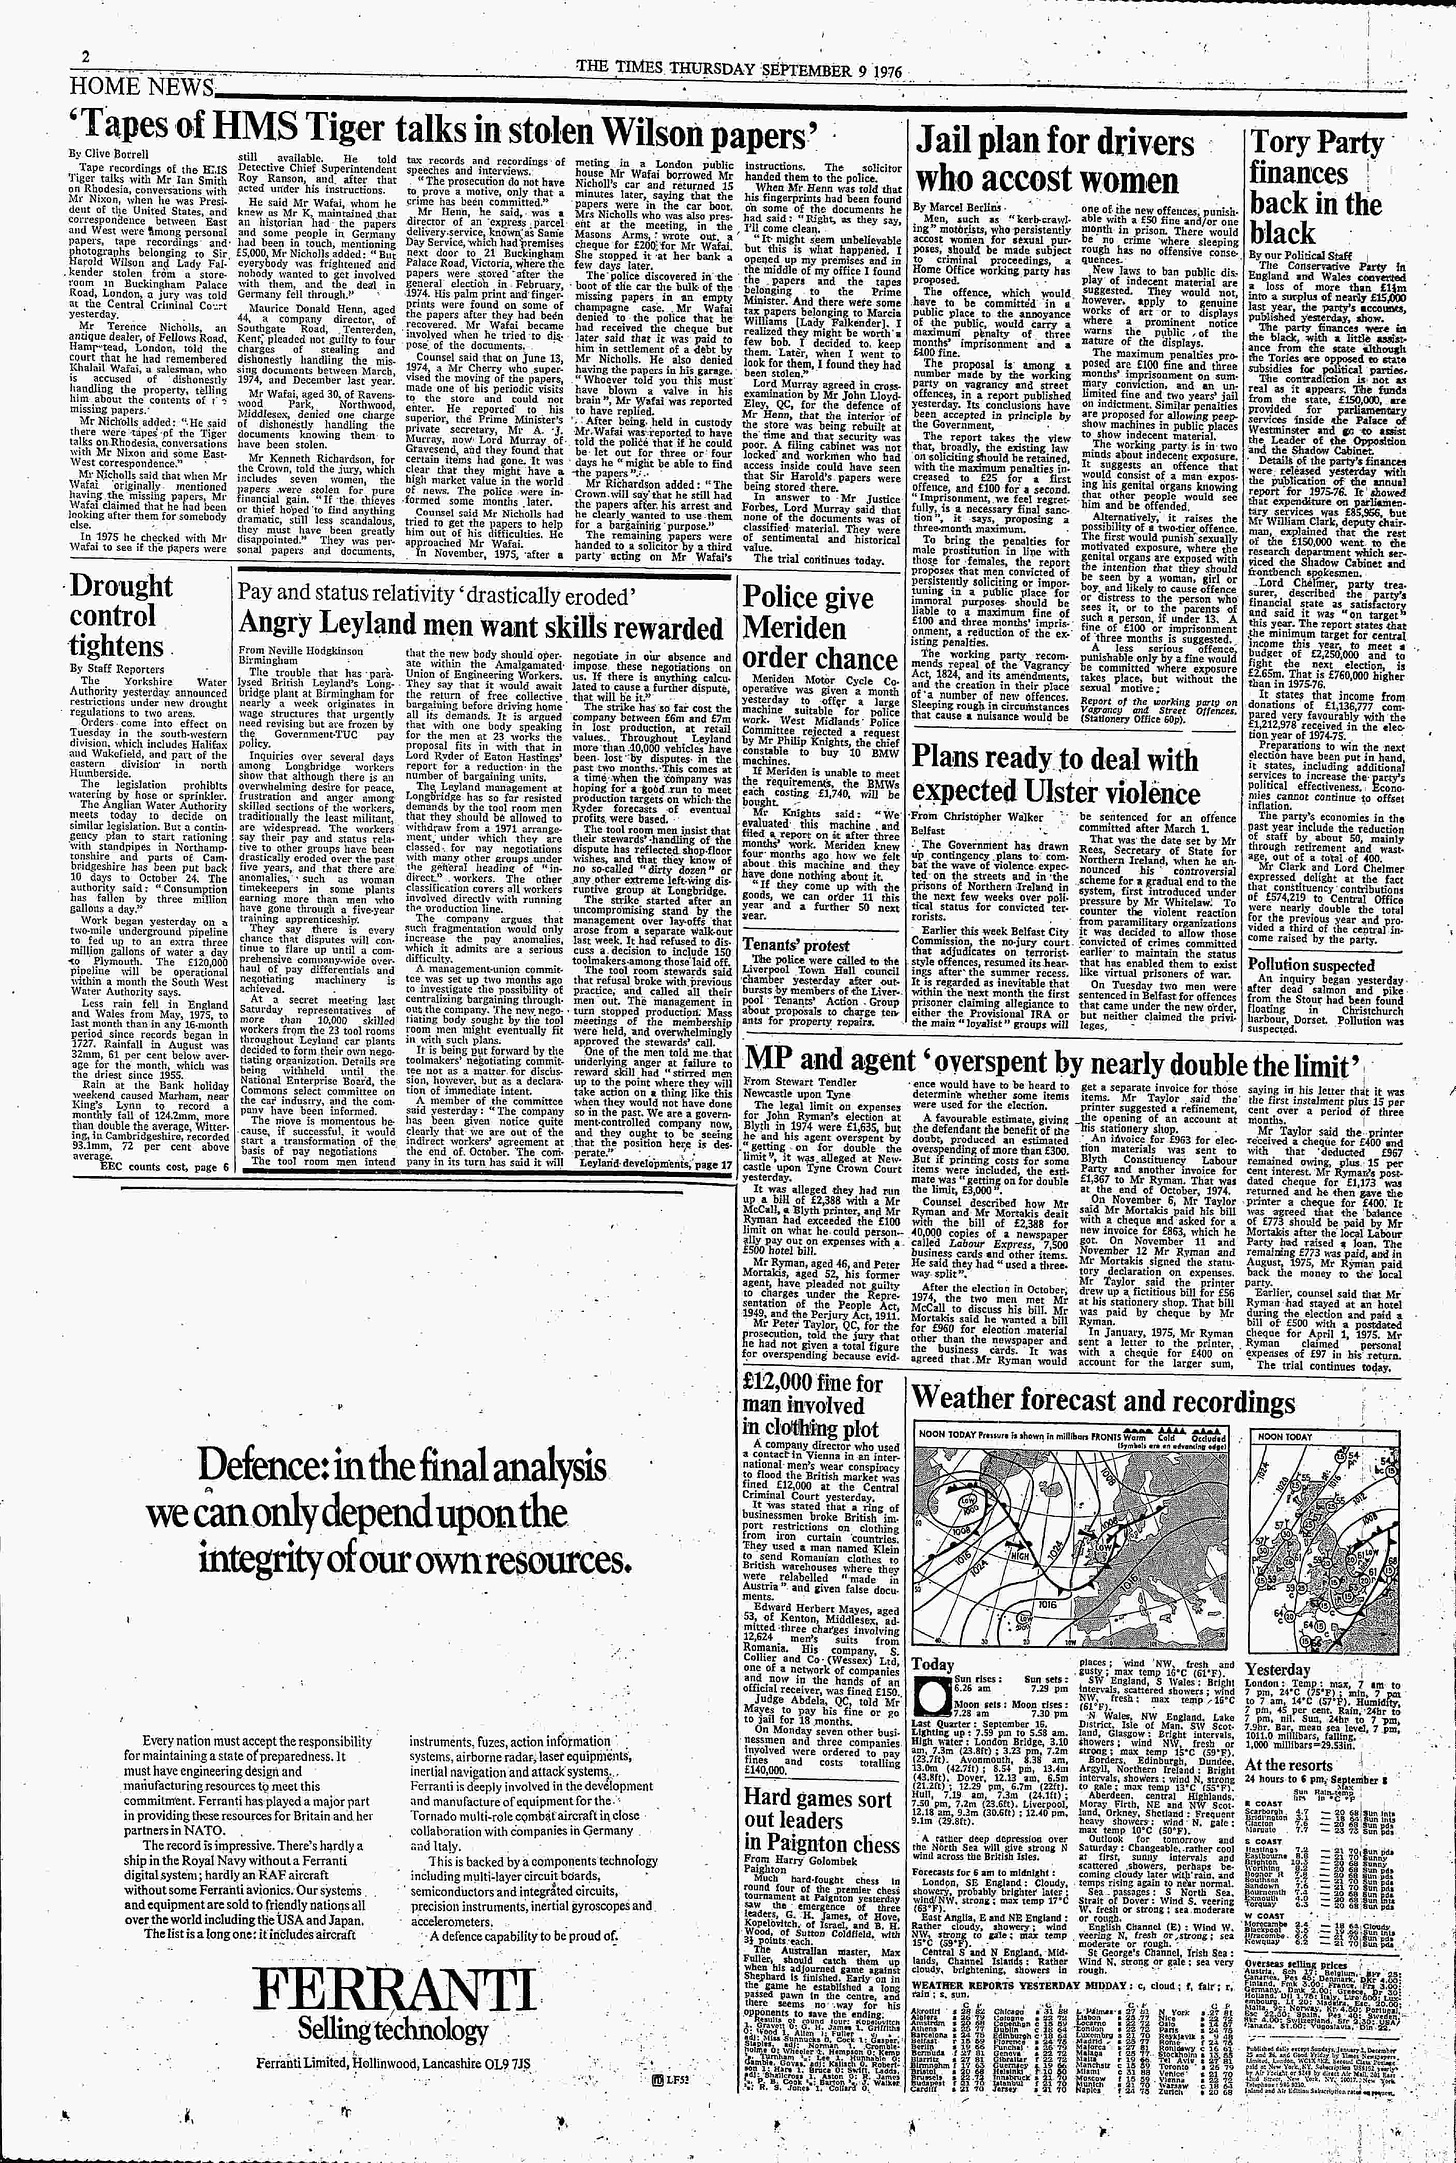 The_Times_1976-09-09